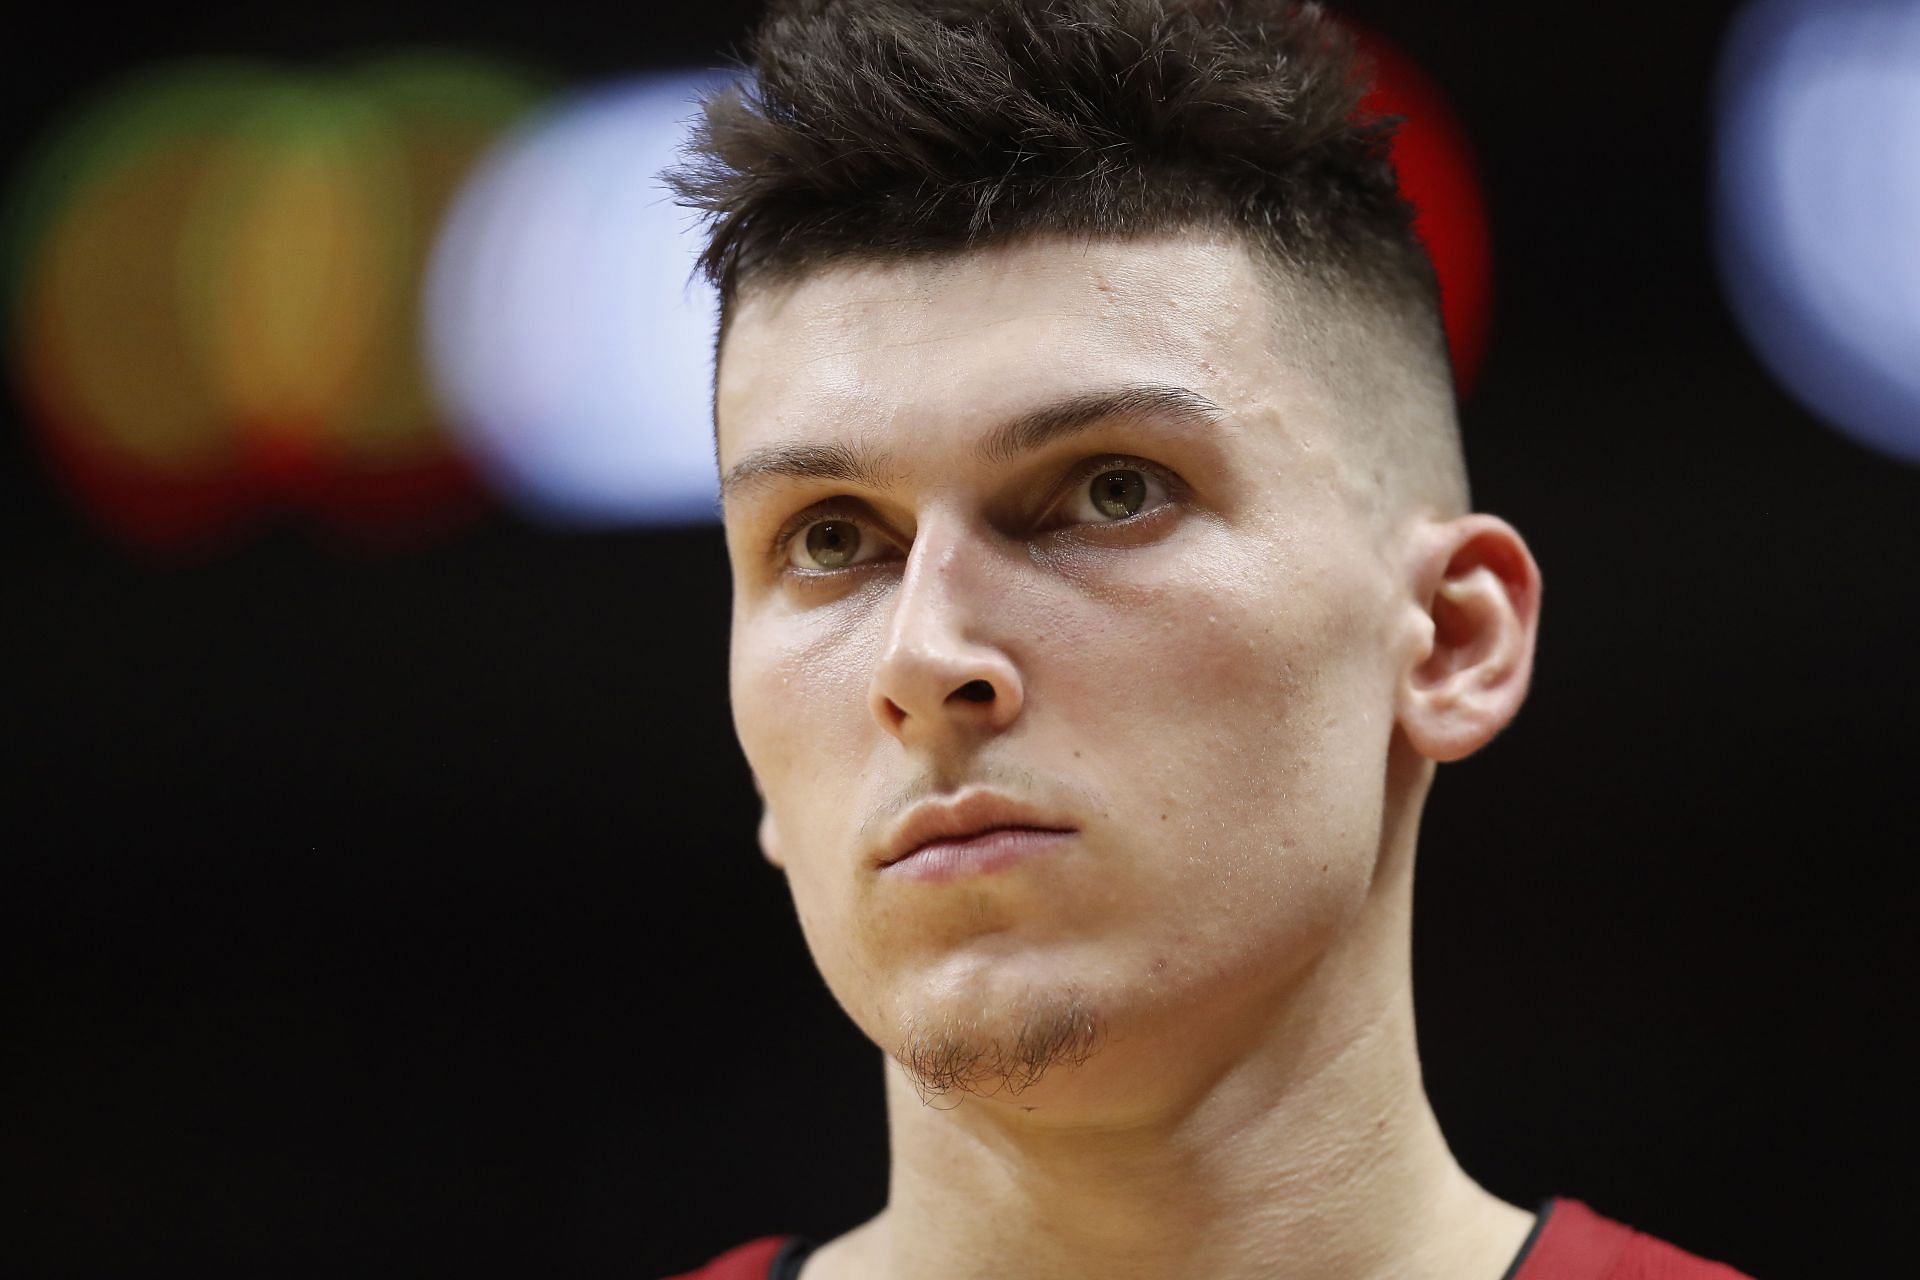 Miami Heat guard Tyler Herro continues to be a favorite for the Sixth Man of the Year award